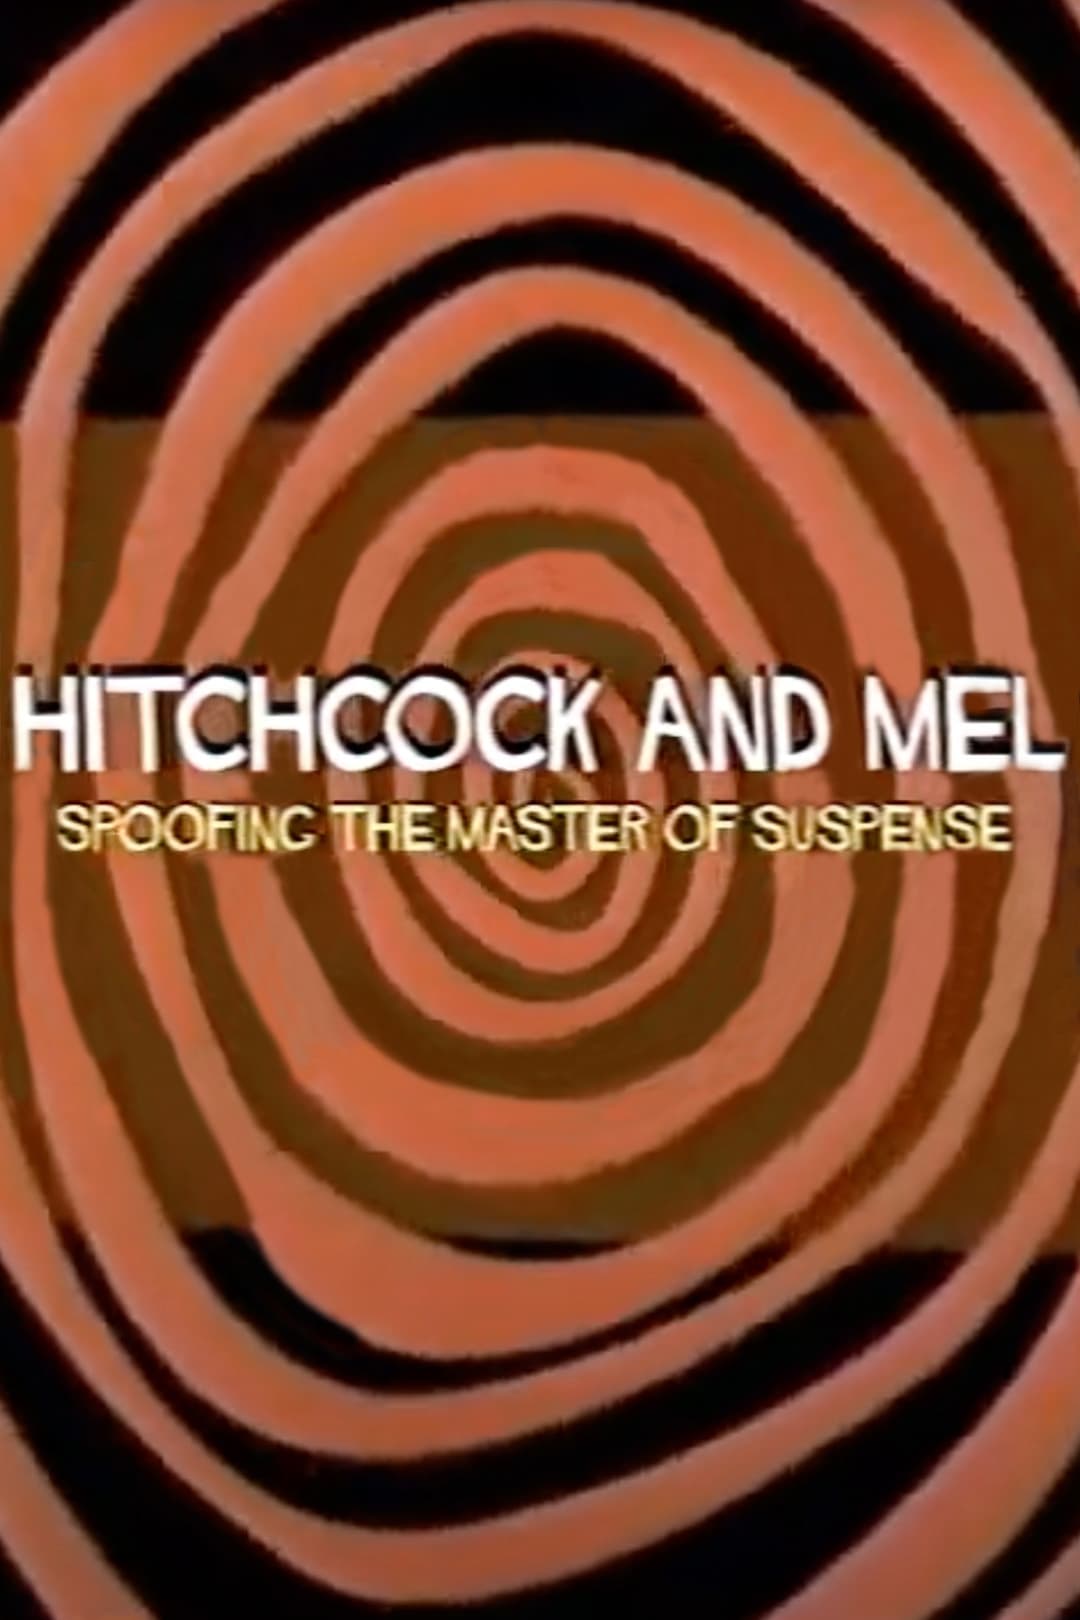 Hitchcock and Mel: Spoofing the Master of Suspense (2009)